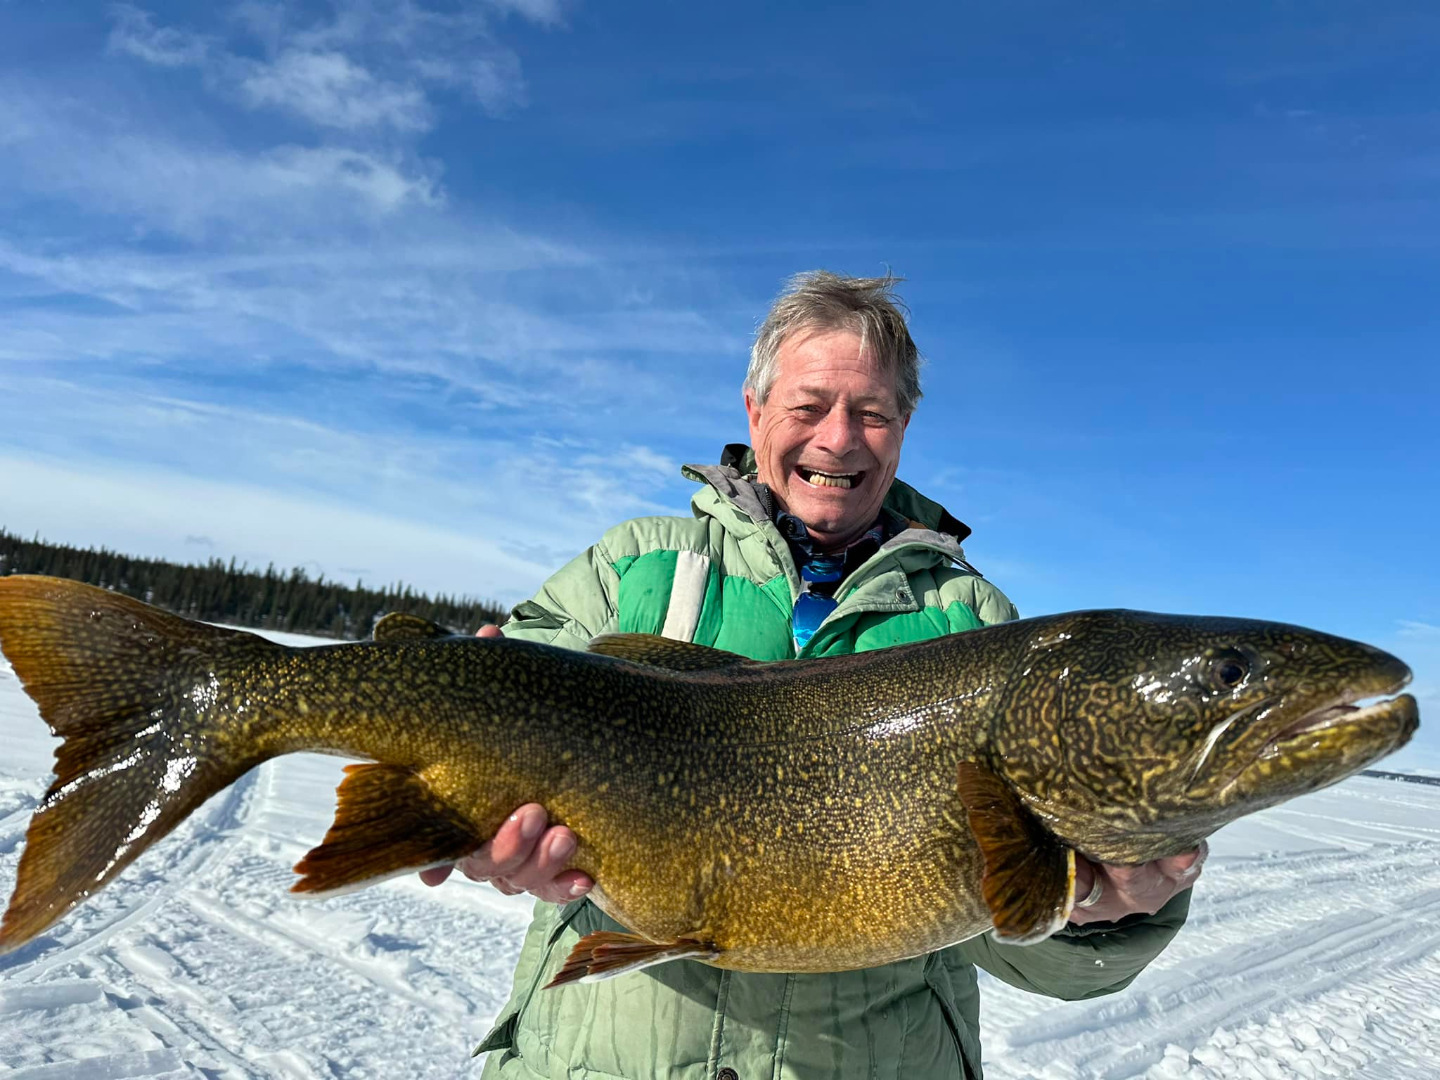 Trophy laker through the ice today